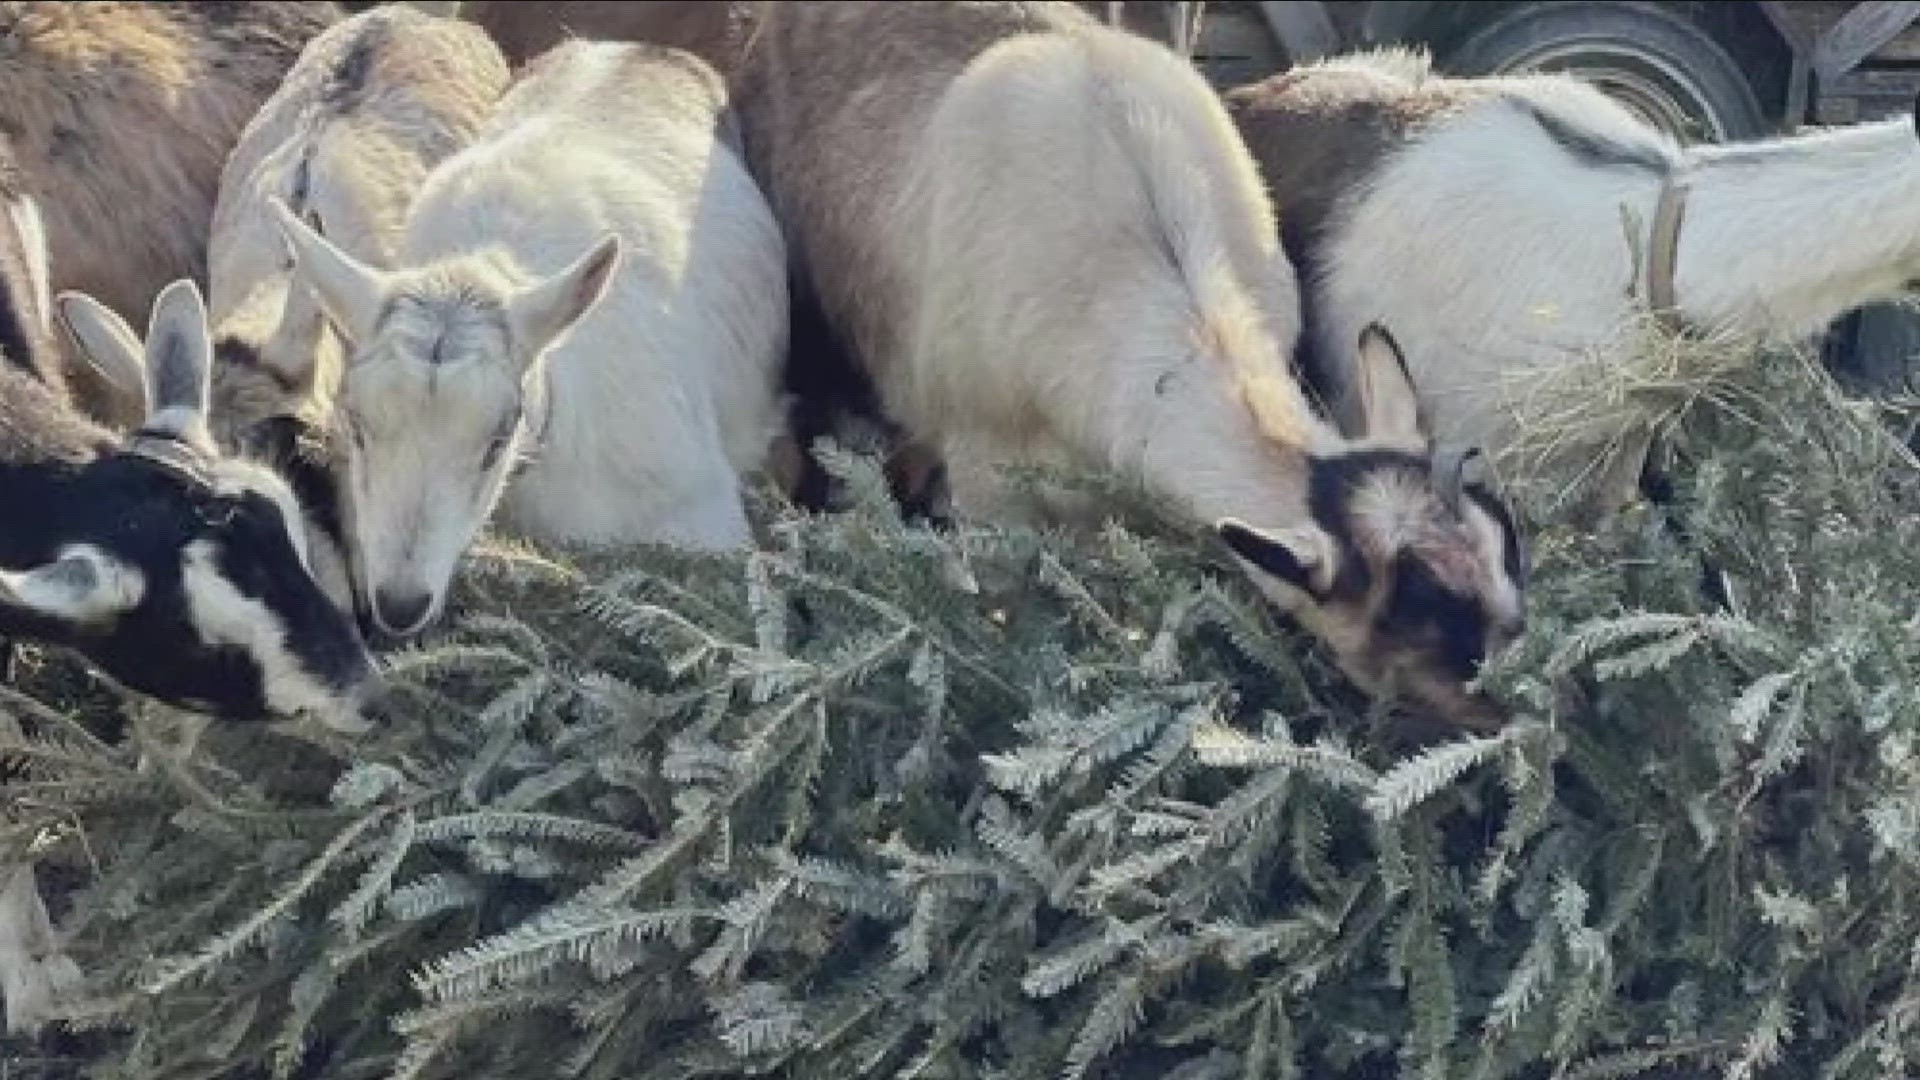 Let's Goat Buffalo is once again collecting Christmas trees for the goats to enjoy